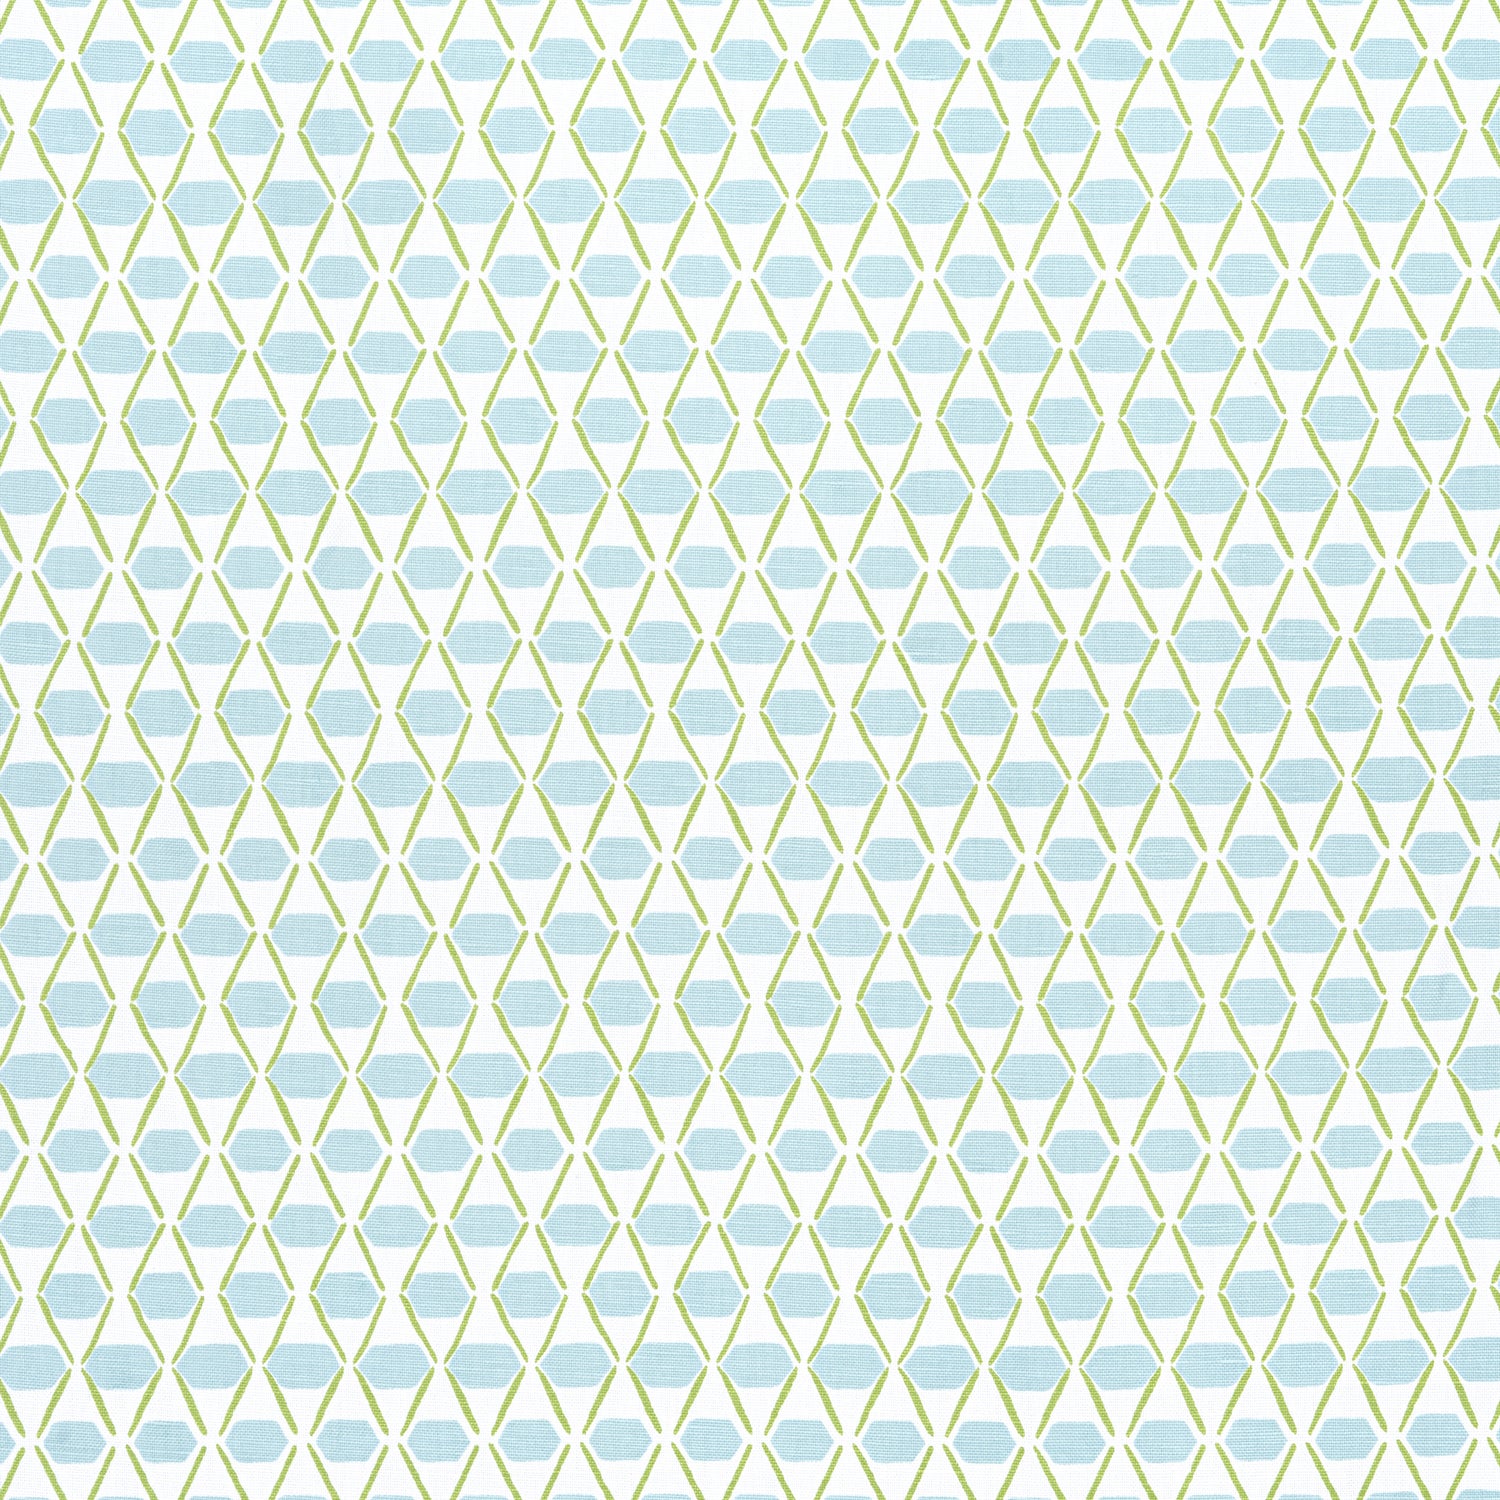 Denver fabric in spa blue and green color - pattern number F914328 - by Thibaut in the Canopy collection